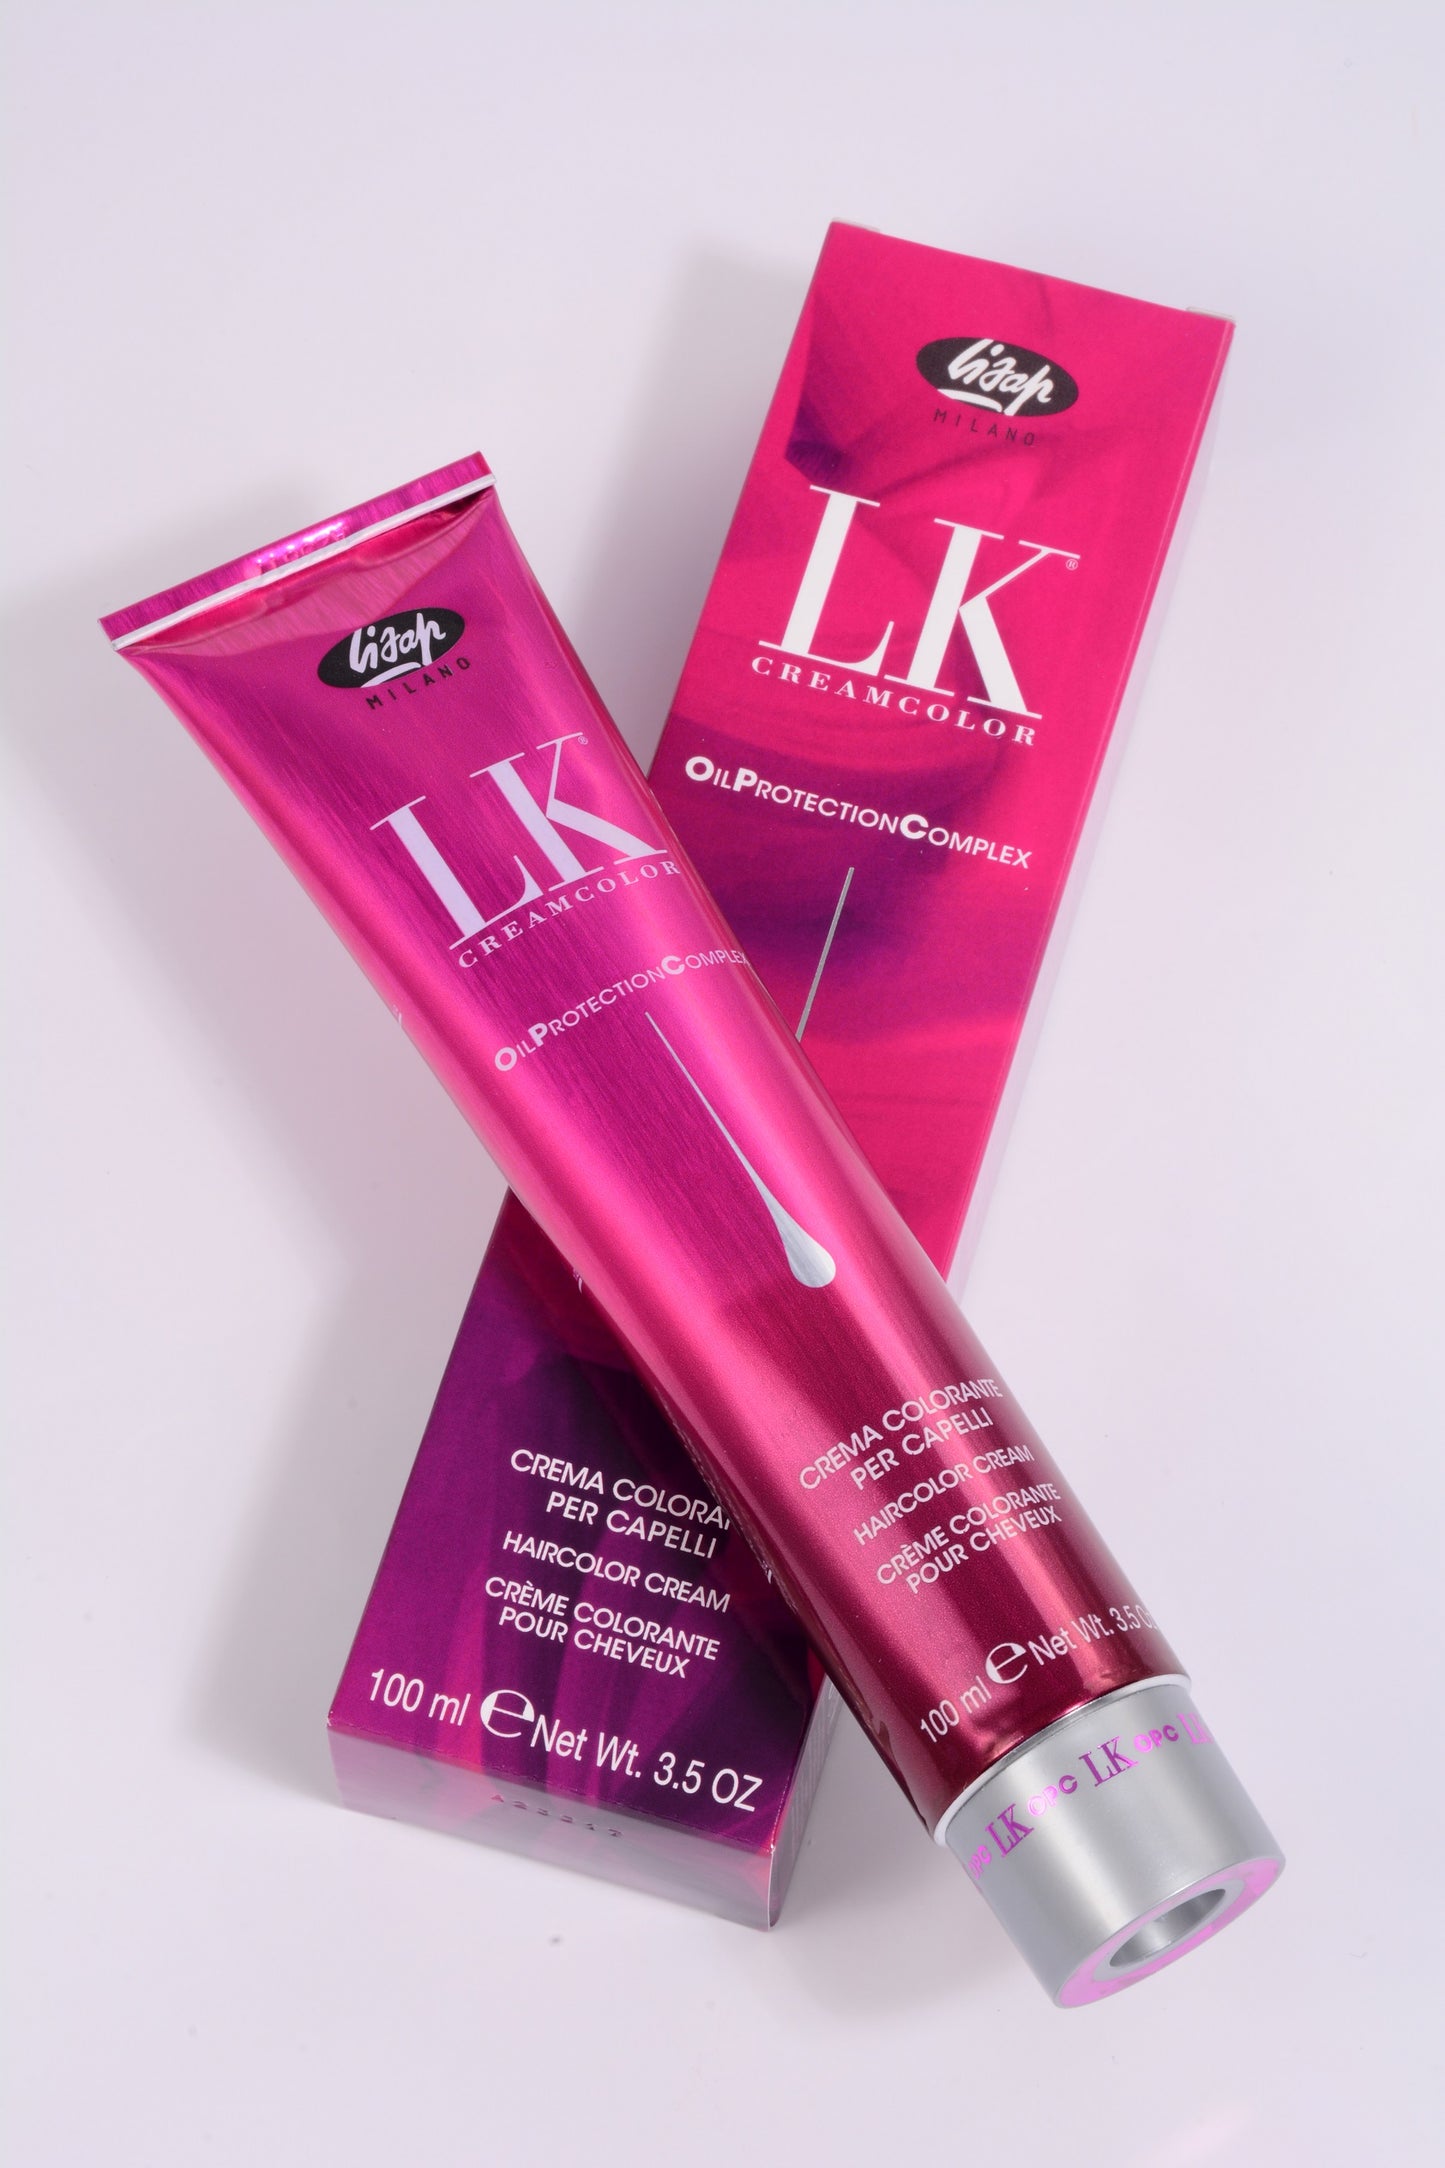 LK Creamcolor 6/3 Oil Protection Complex